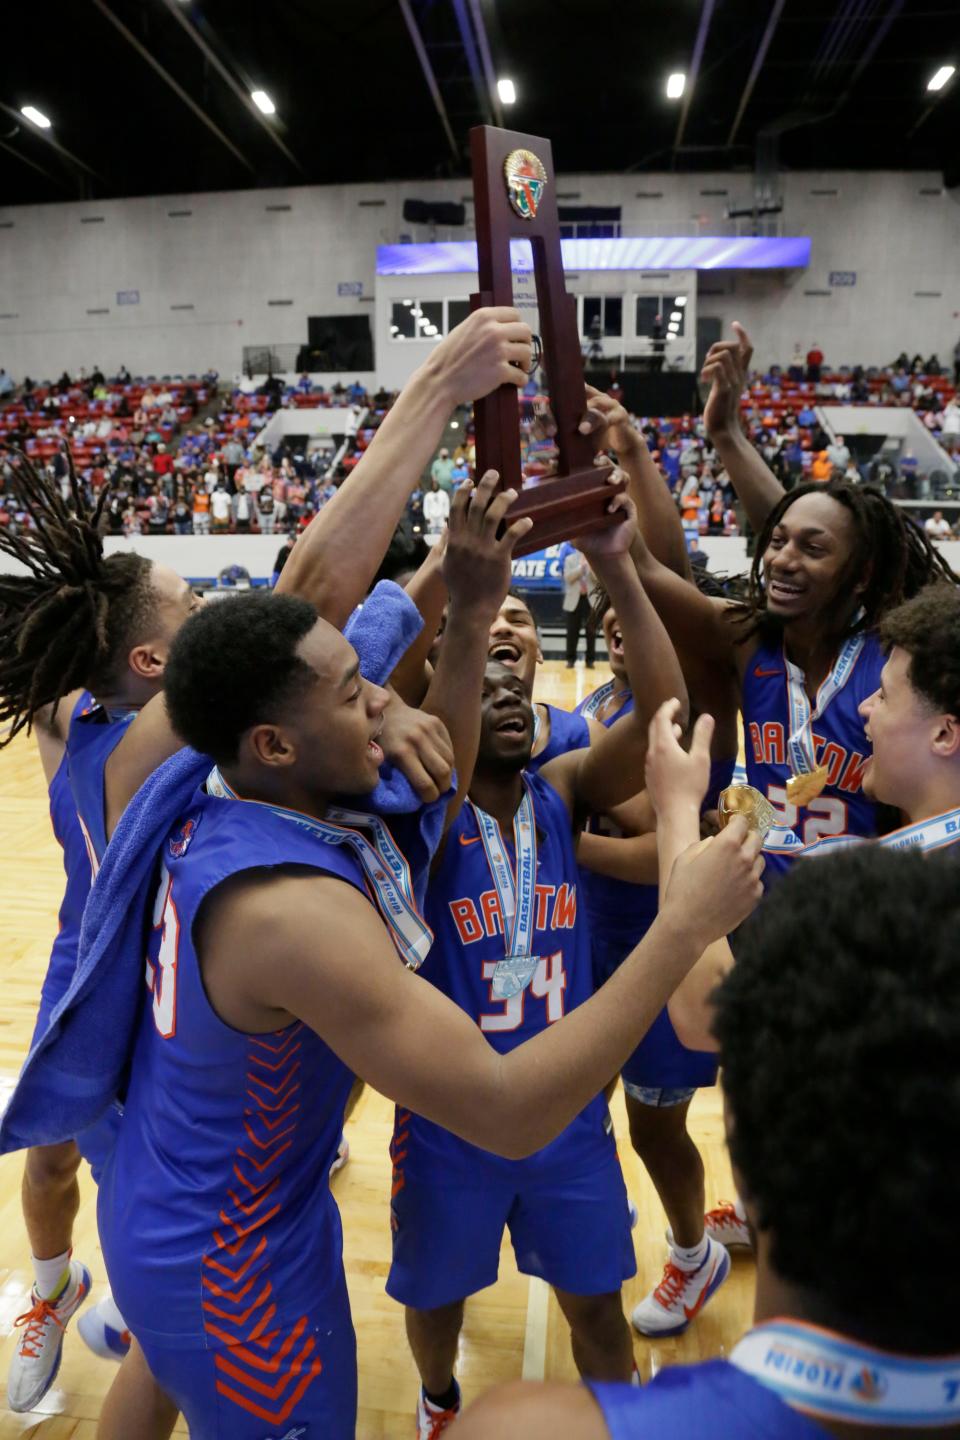 Bartow celebrates with the state championship trophy after winning its second state title in a row in March.